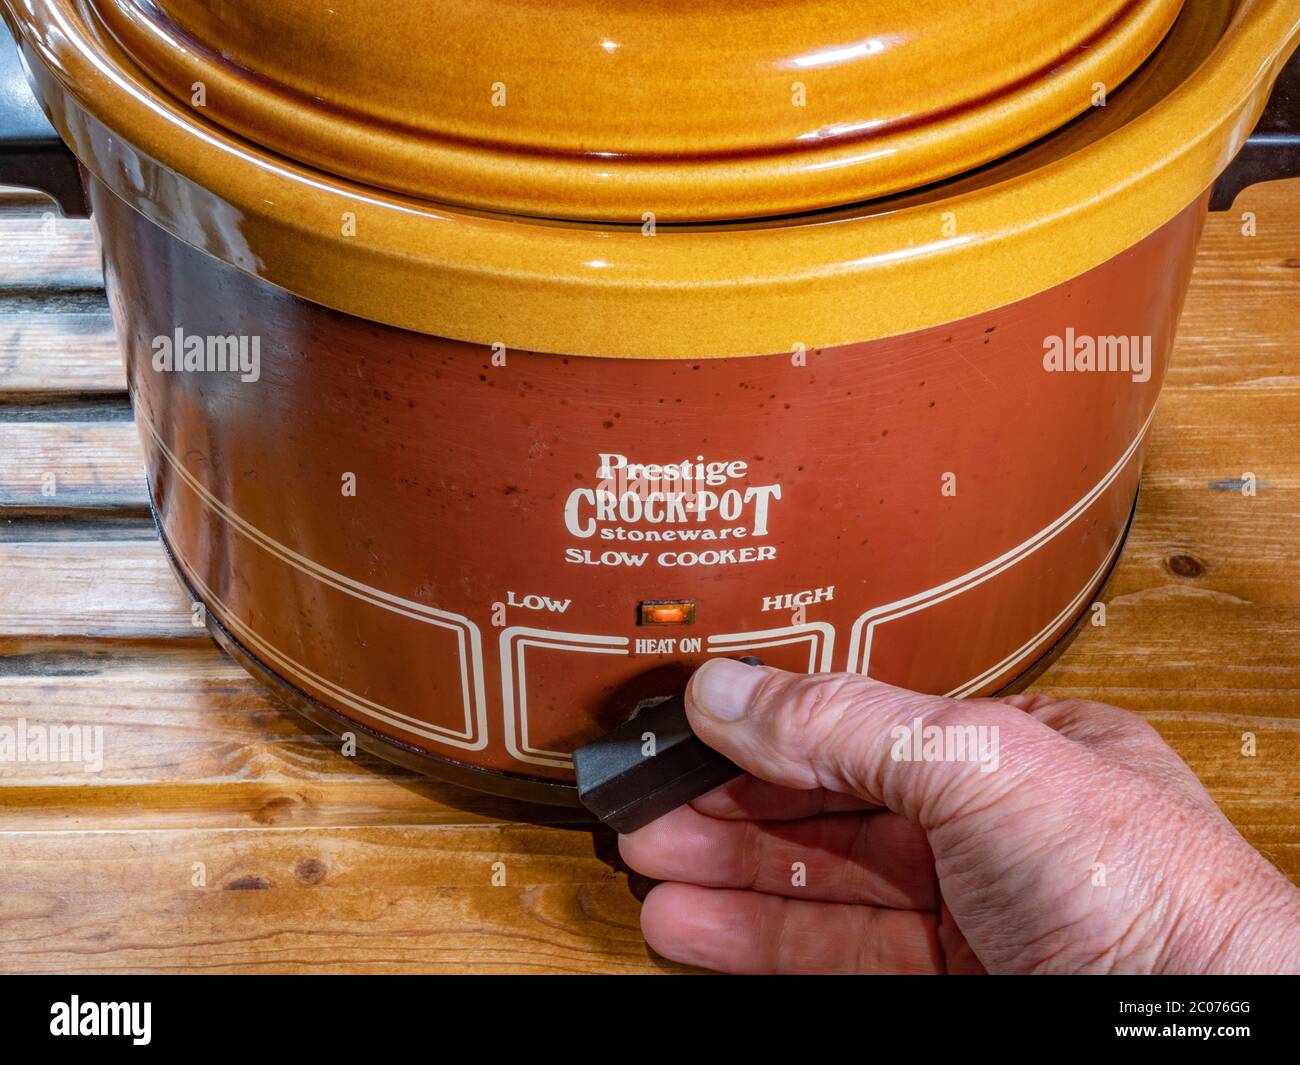 https://c8.alamy.com/comp/2C076GG/hand-turning-the-heat-control-knob-on-a-vintage-prestige-stoneware-crock-pot-a-stoneware-slow-cooker-made-in-the-usa-popular-in-the-early-1980s-2C076GG.jpg